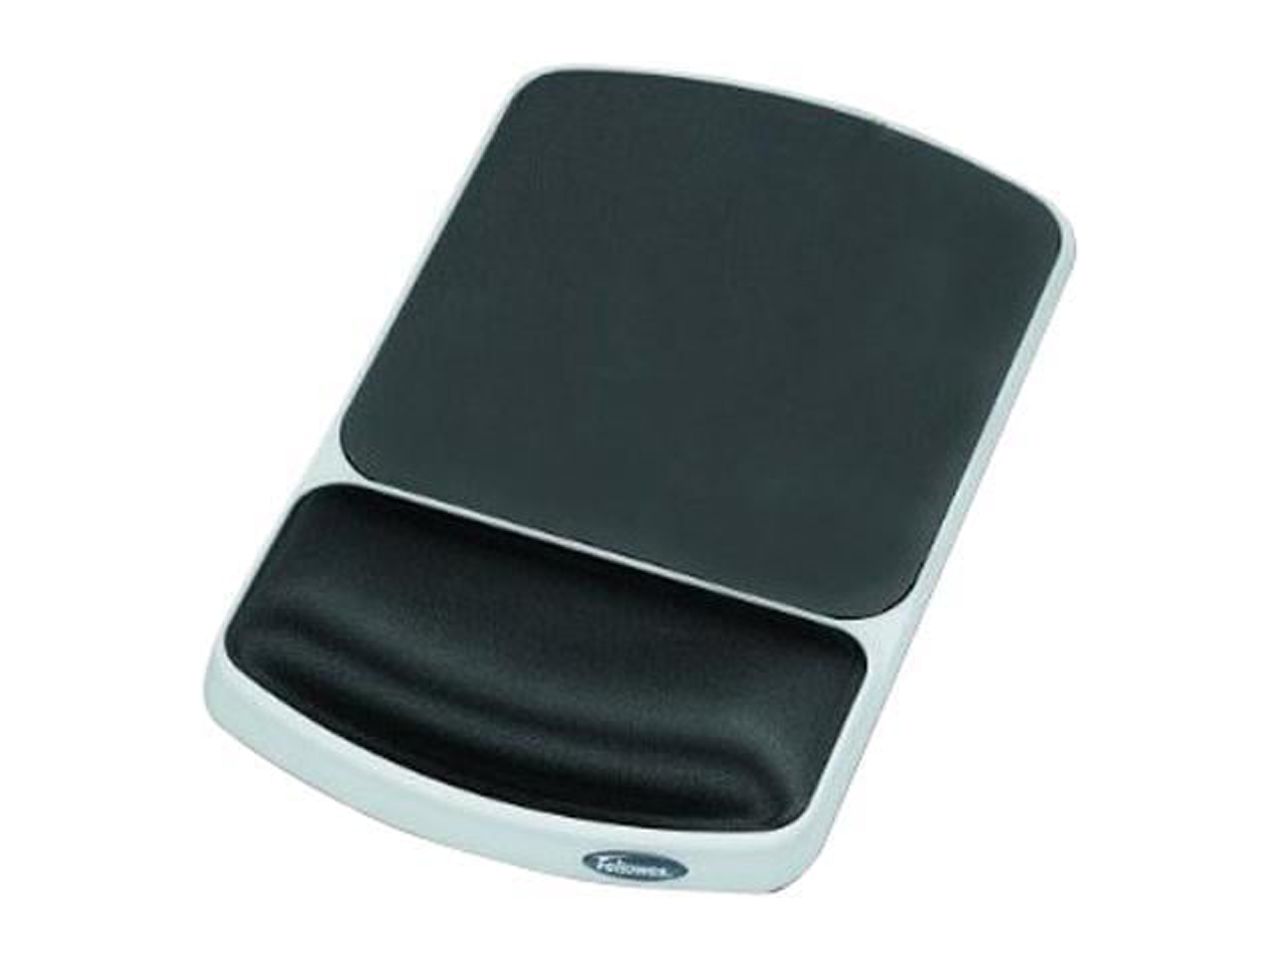 Fellowes 91741 Gel Wrist Rest and Mouse Pad - Graphite/Platinum - image 2 of 3